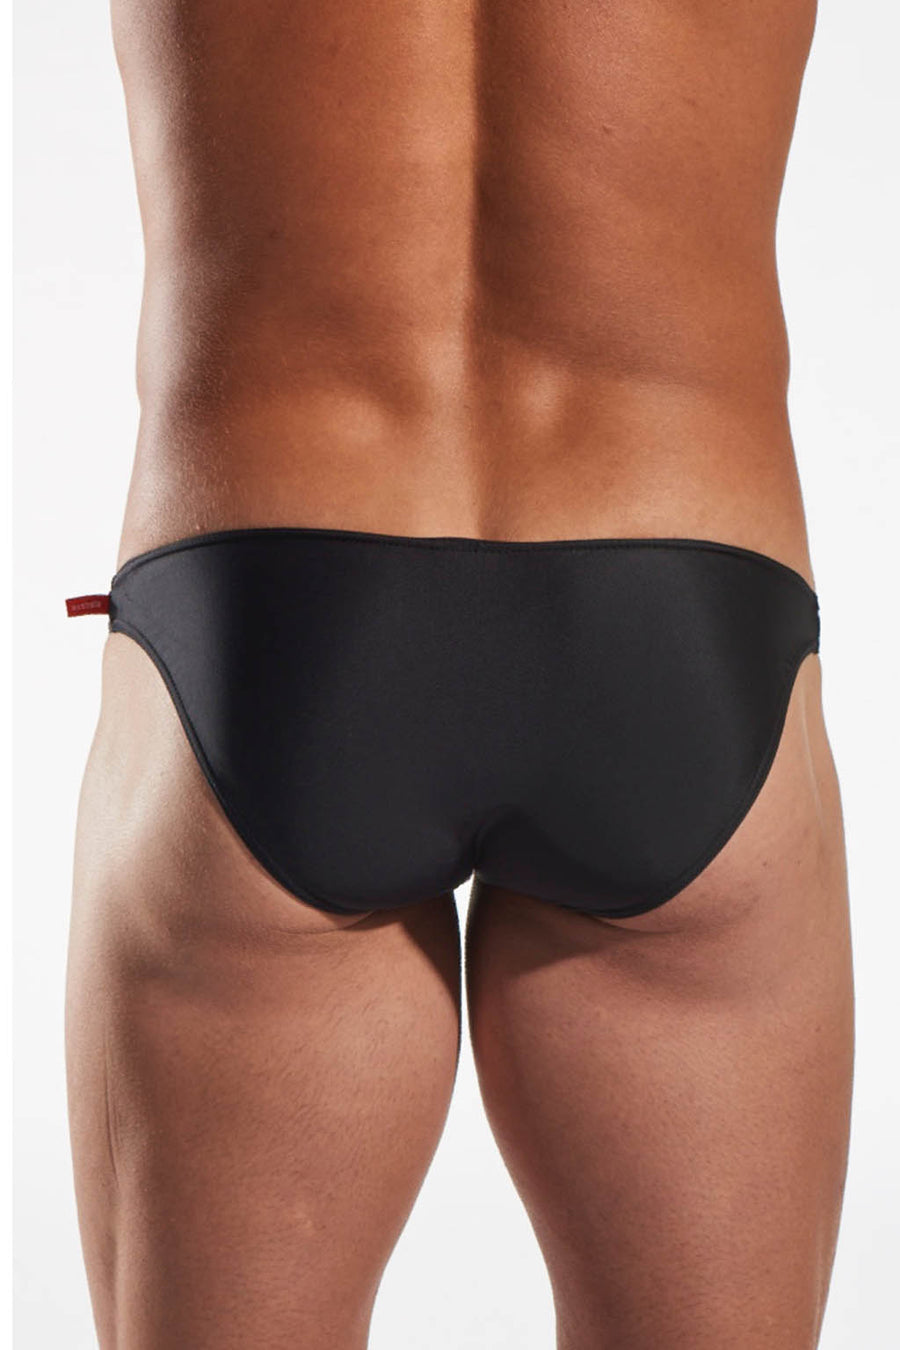 Mens Crotchless Swimwear With Bulge Pouch Stretchy, Sexy, And Comfortable  Underwear For Bikini, Thong, Briefs, Crotchless Micro Bikini, Underpan, Or  Bongs From Qiushouqq, $12.56